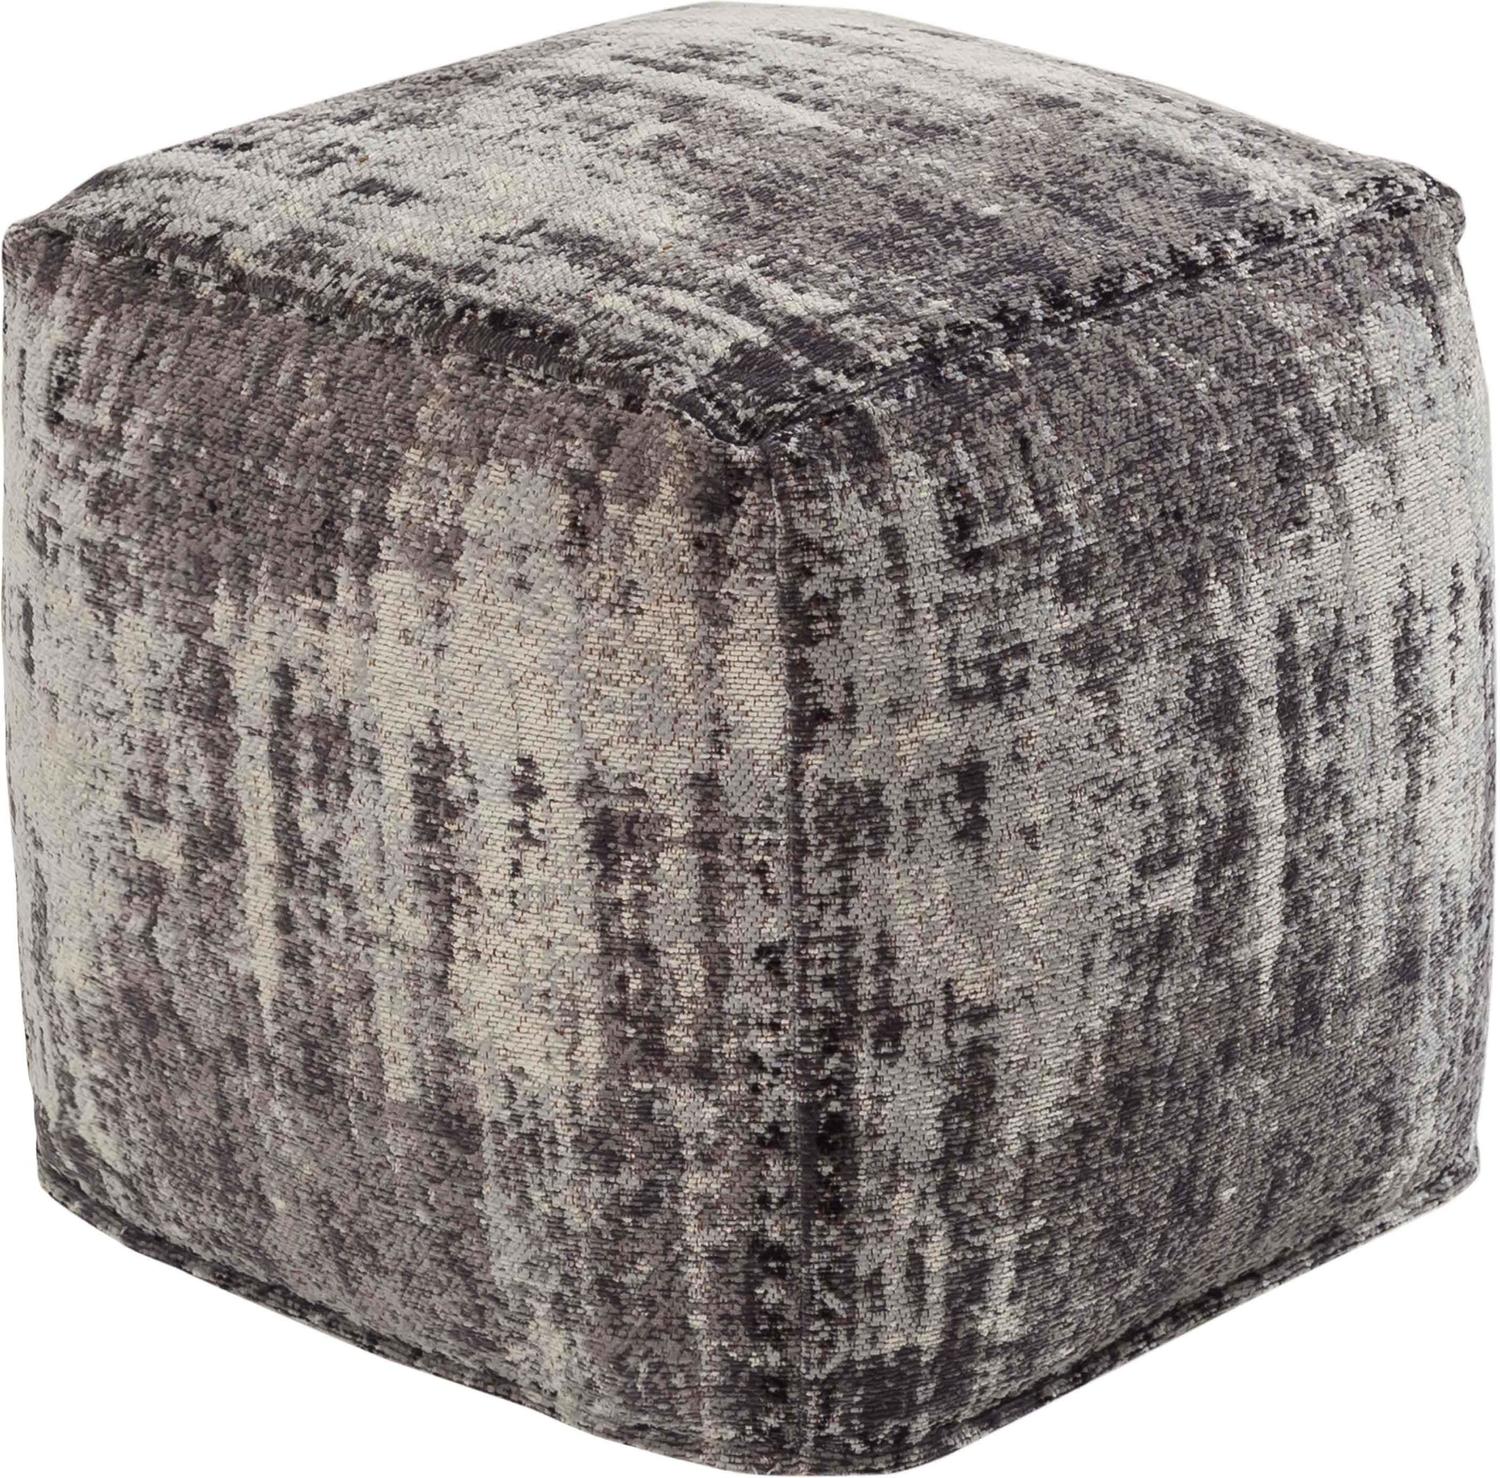 Tov Furniture Ottomans Ottomans and Benches Grey